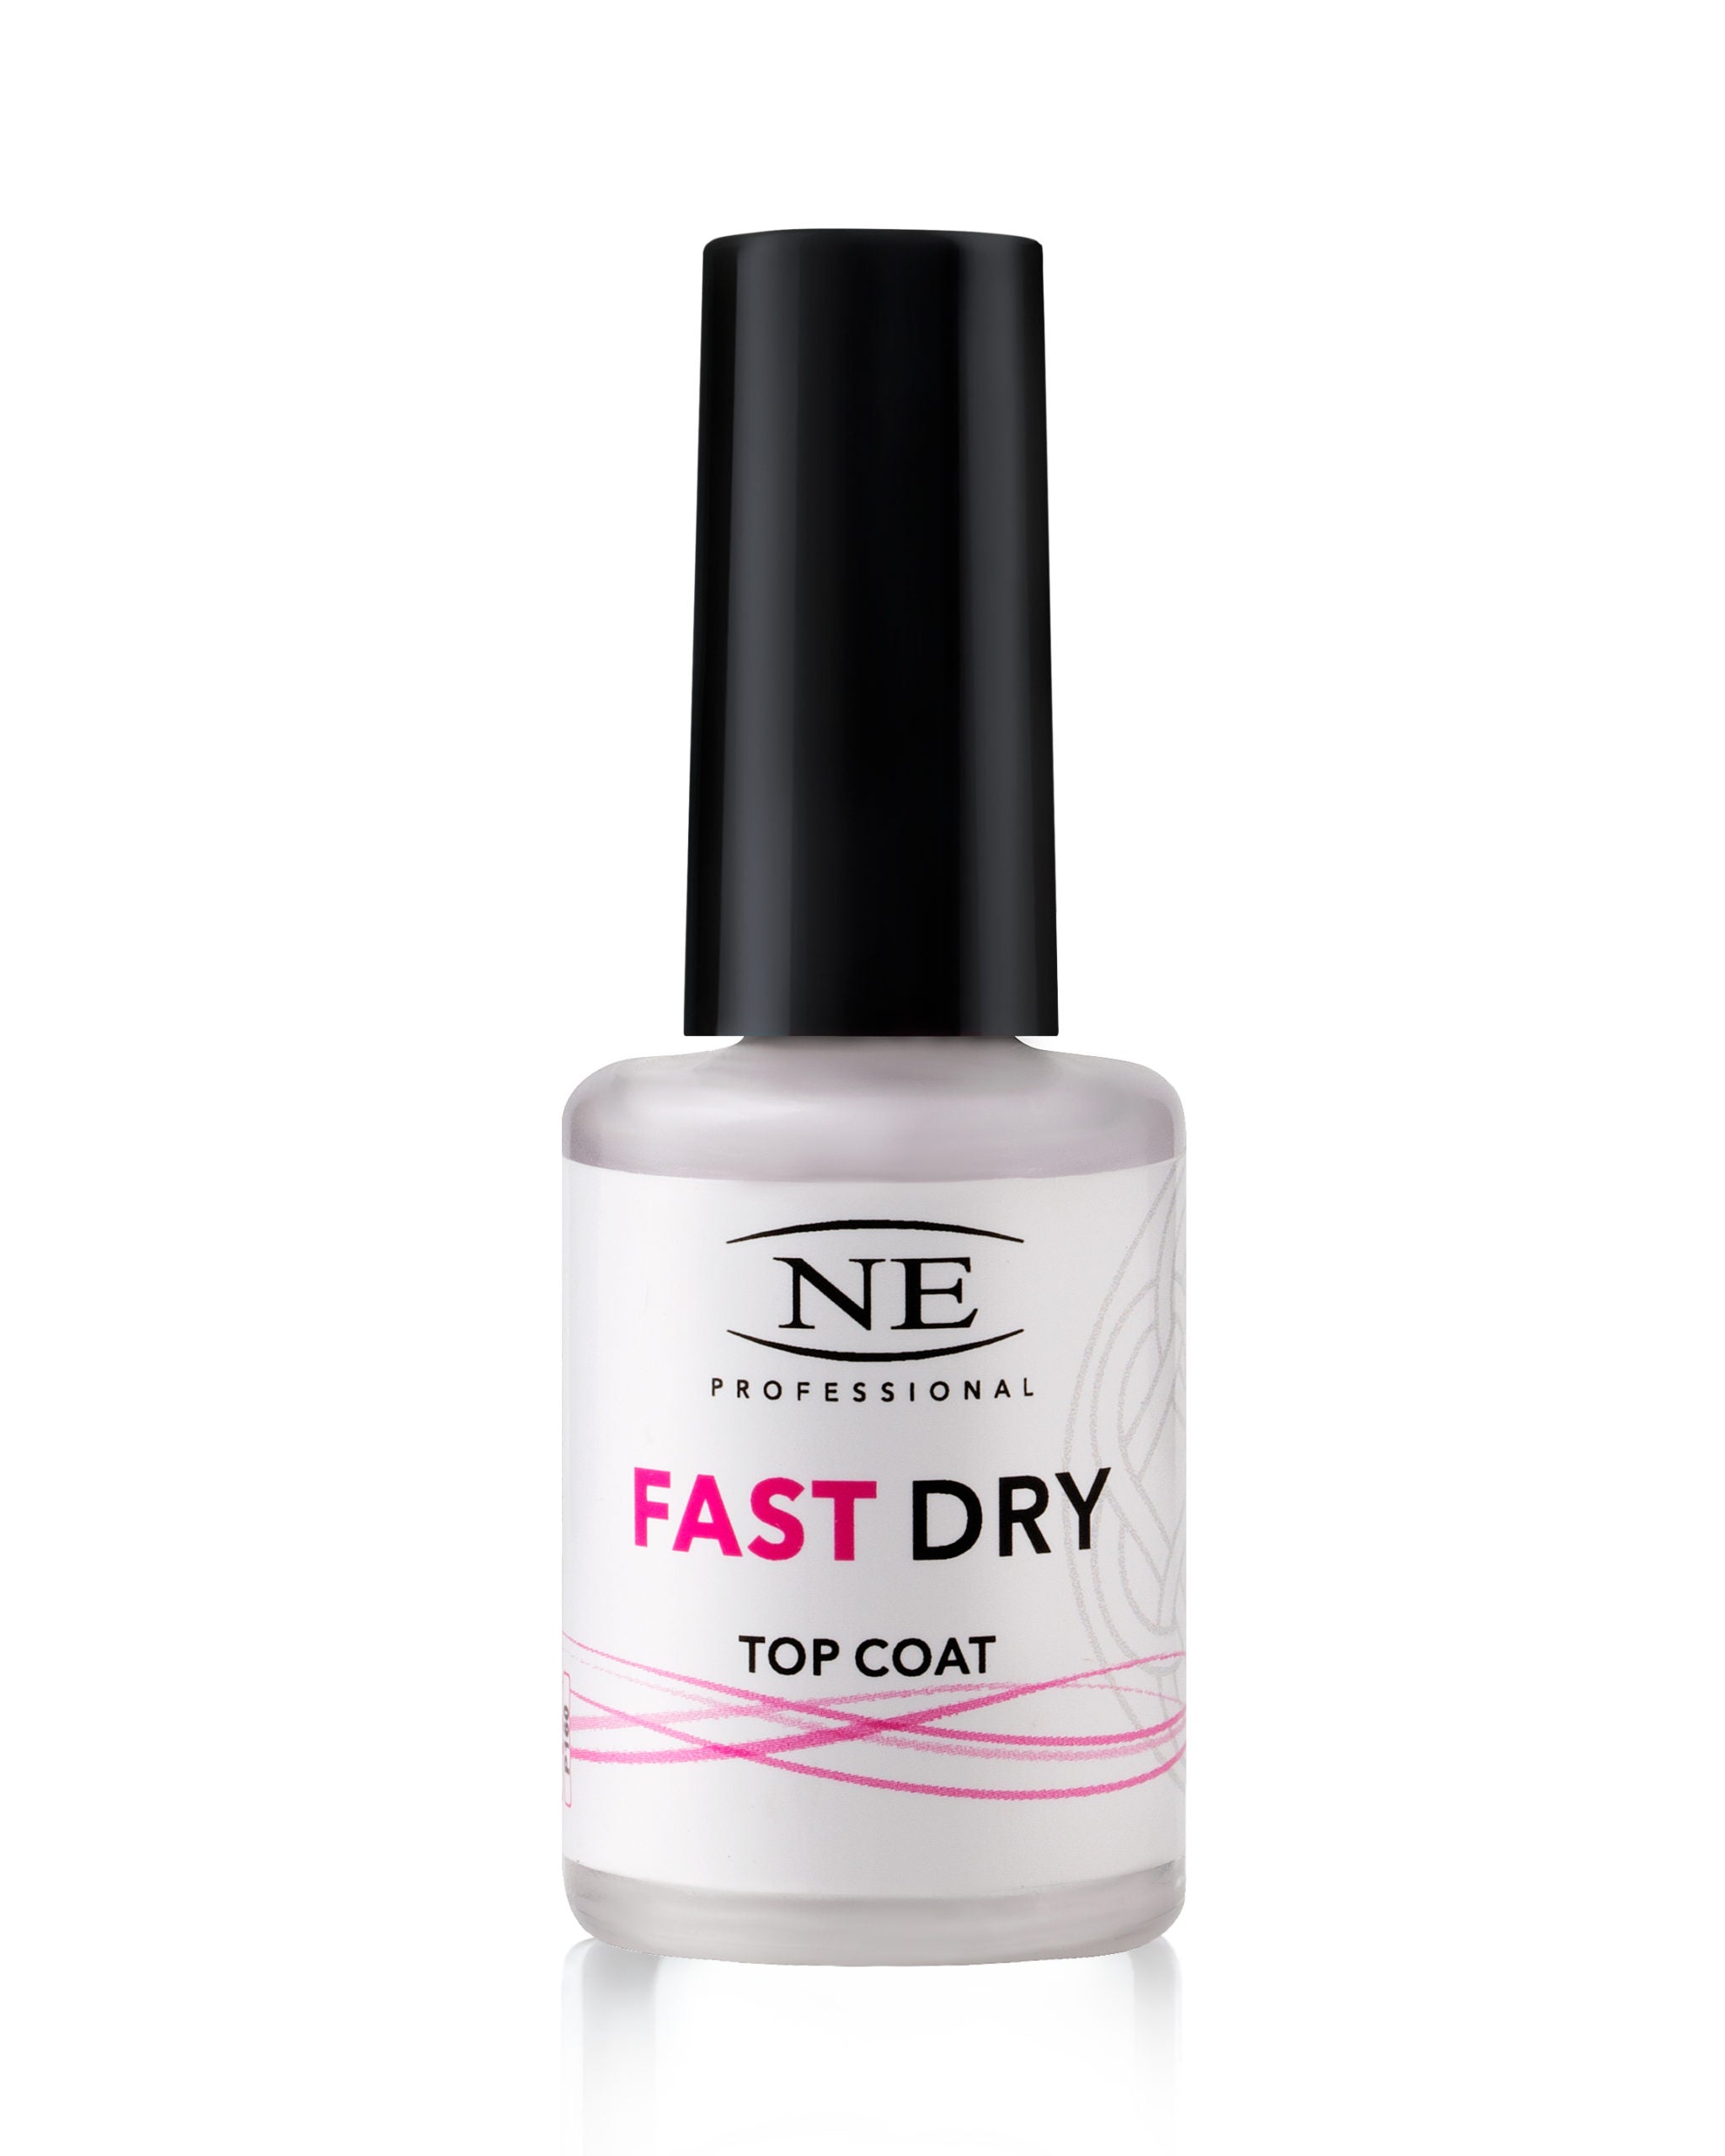 Fast Dry Top Coat by NE Professional